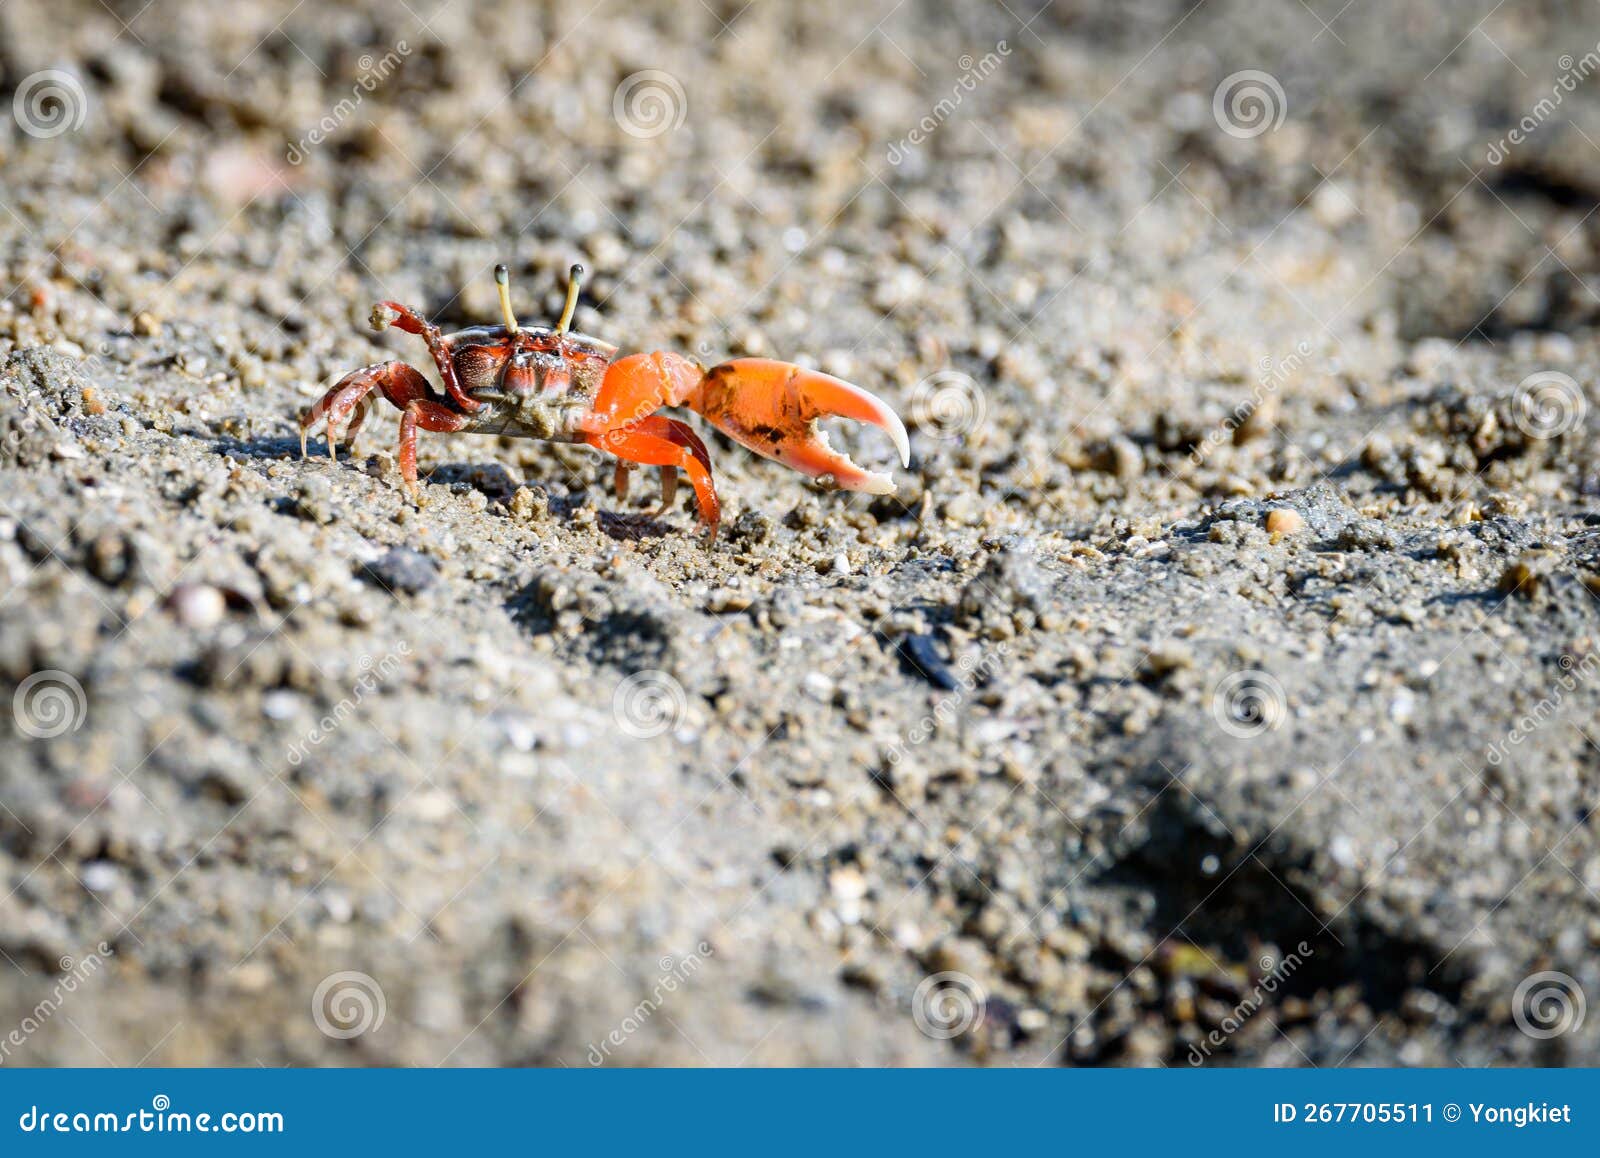 Fiddler Crabs, Small Male Sea Crab is Eating Food Stock Image